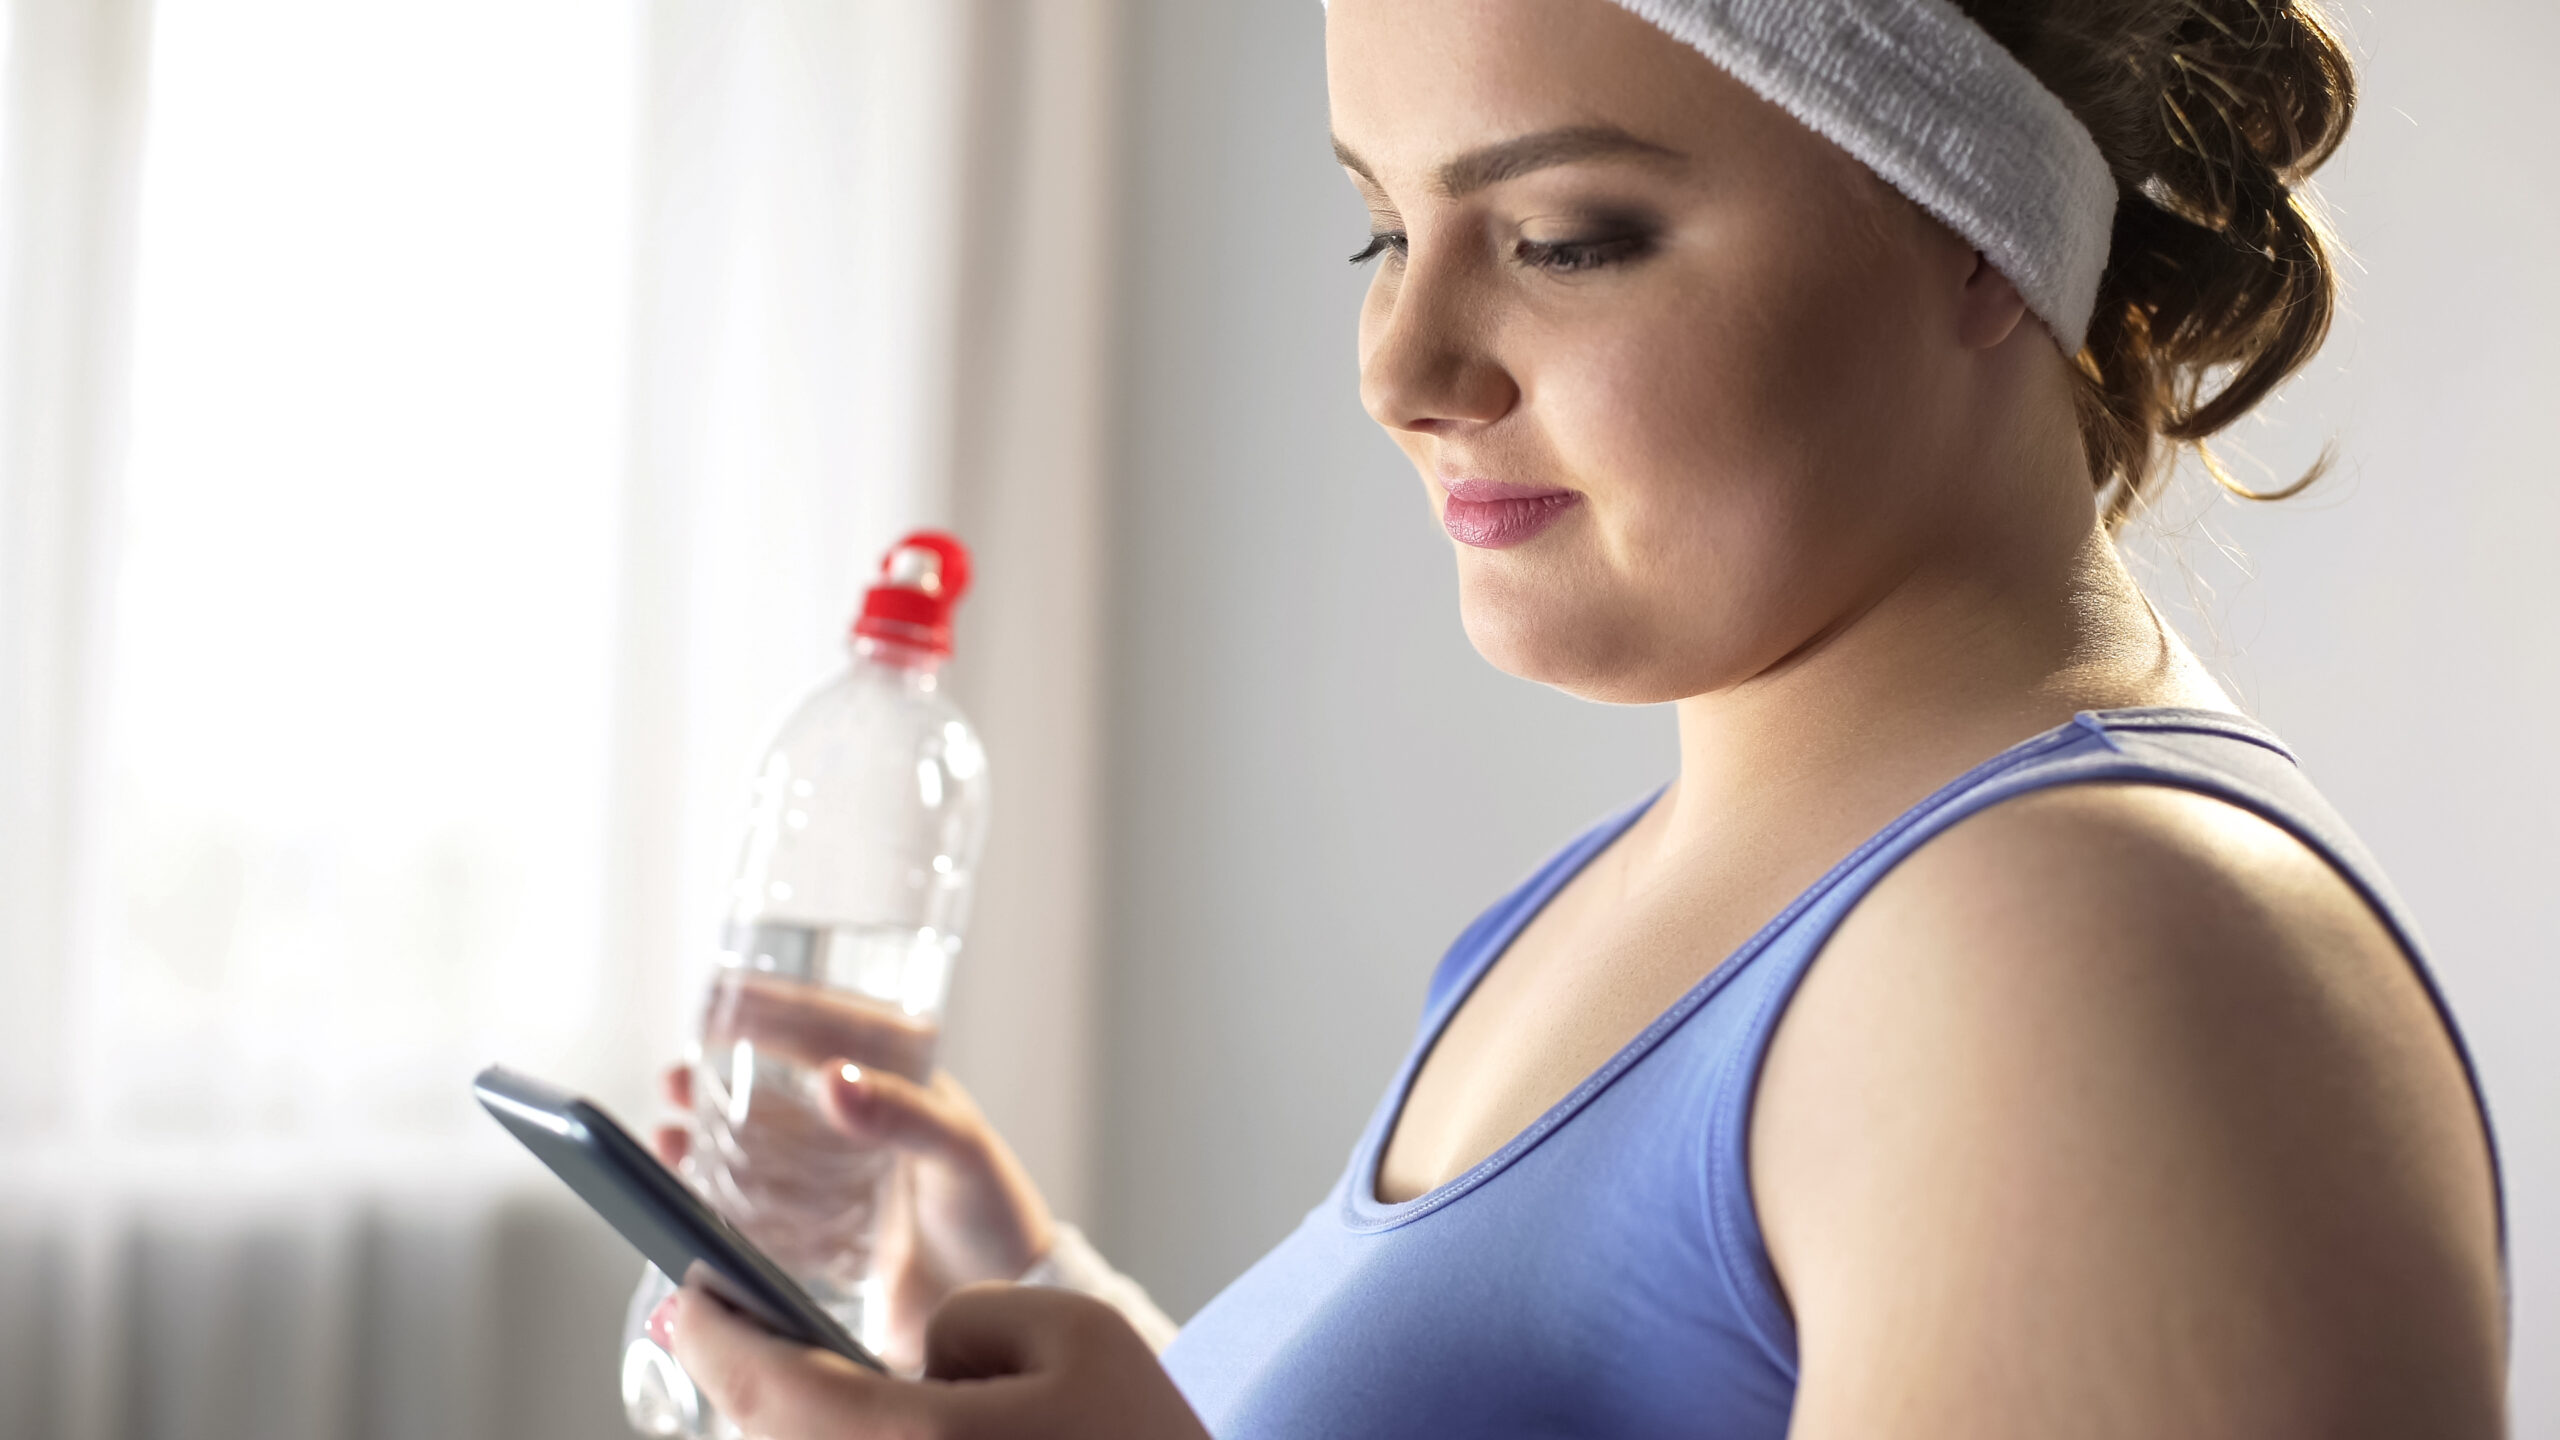 Plump lady scrolling on smartphone, looking for new tips to lose extra weight